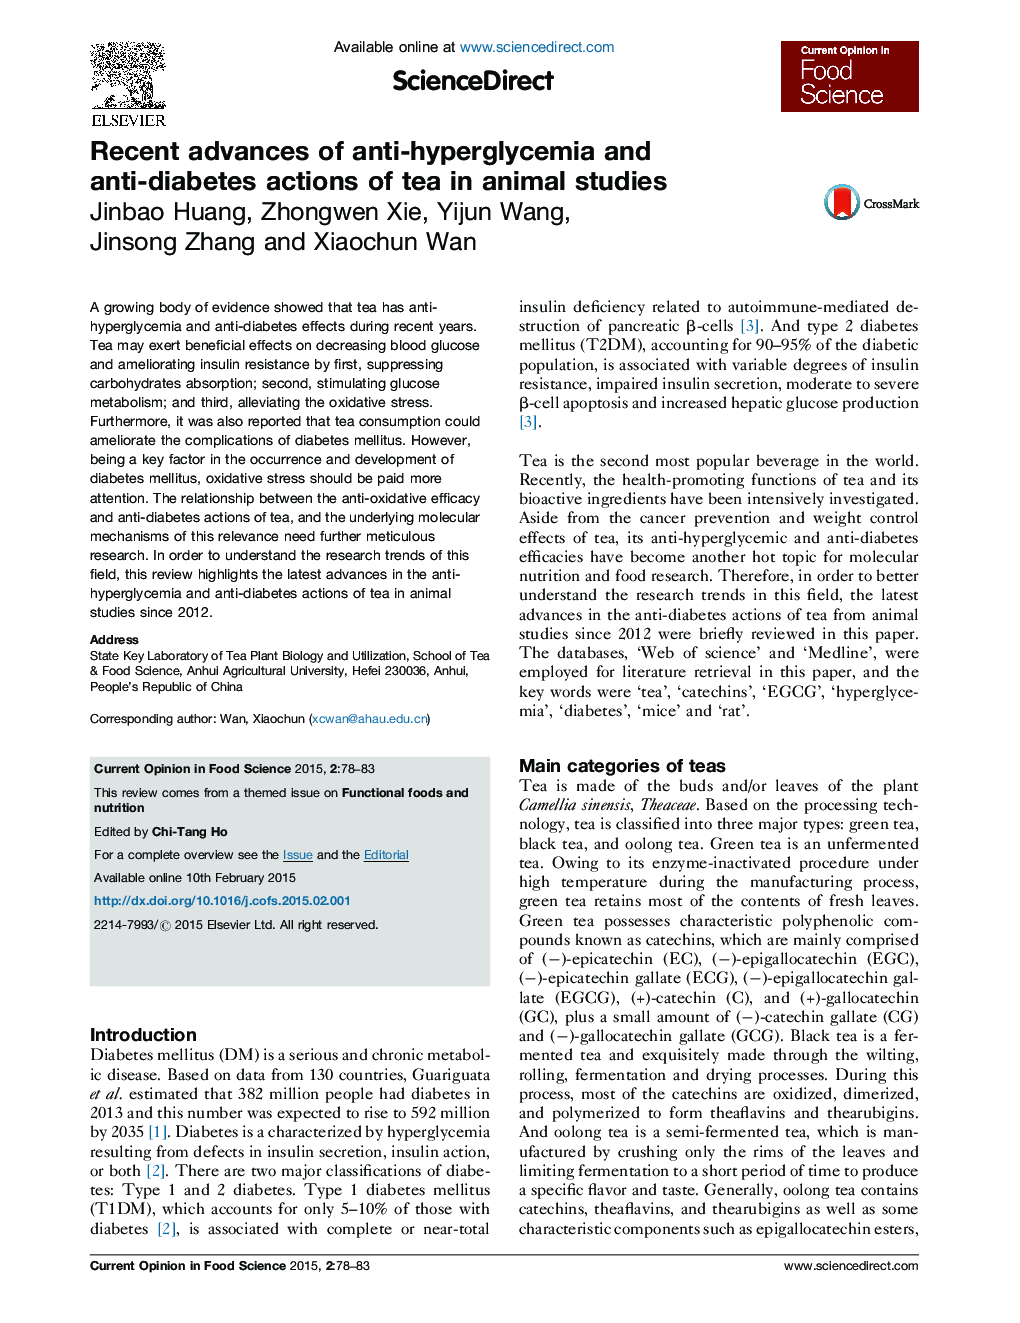 Recent advances of anti-hyperglycemia and anti-diabetes actions of tea in animal studies